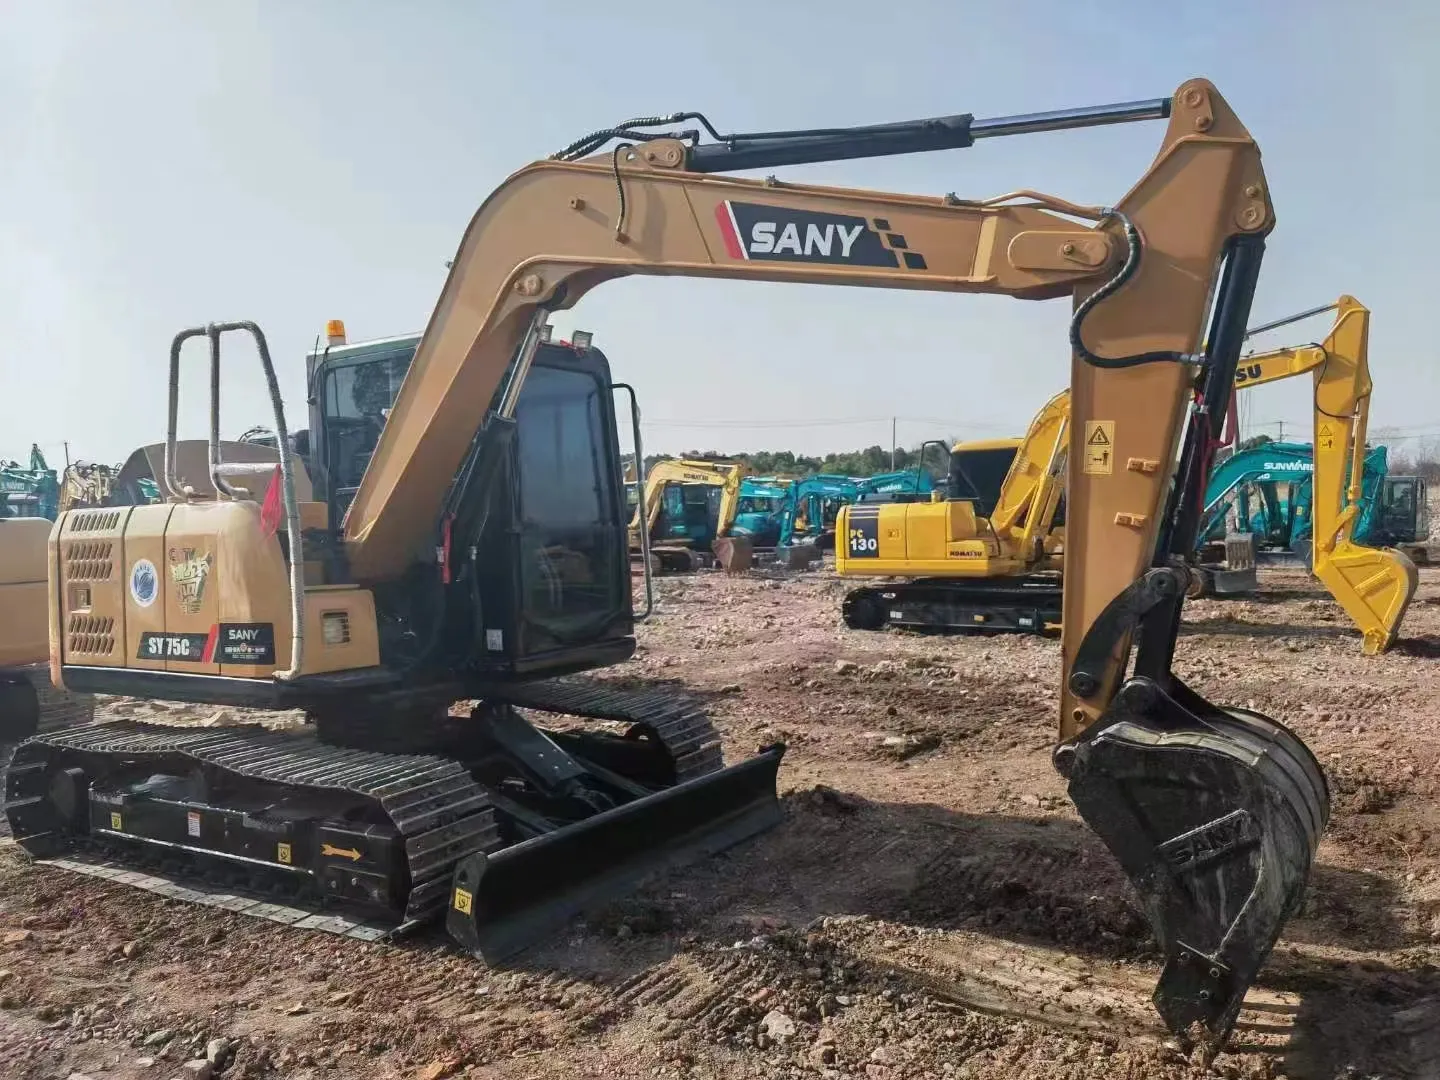 Factory for sale at a low price used SANY professional excavator SANY SY75C used construction machinery quality is better